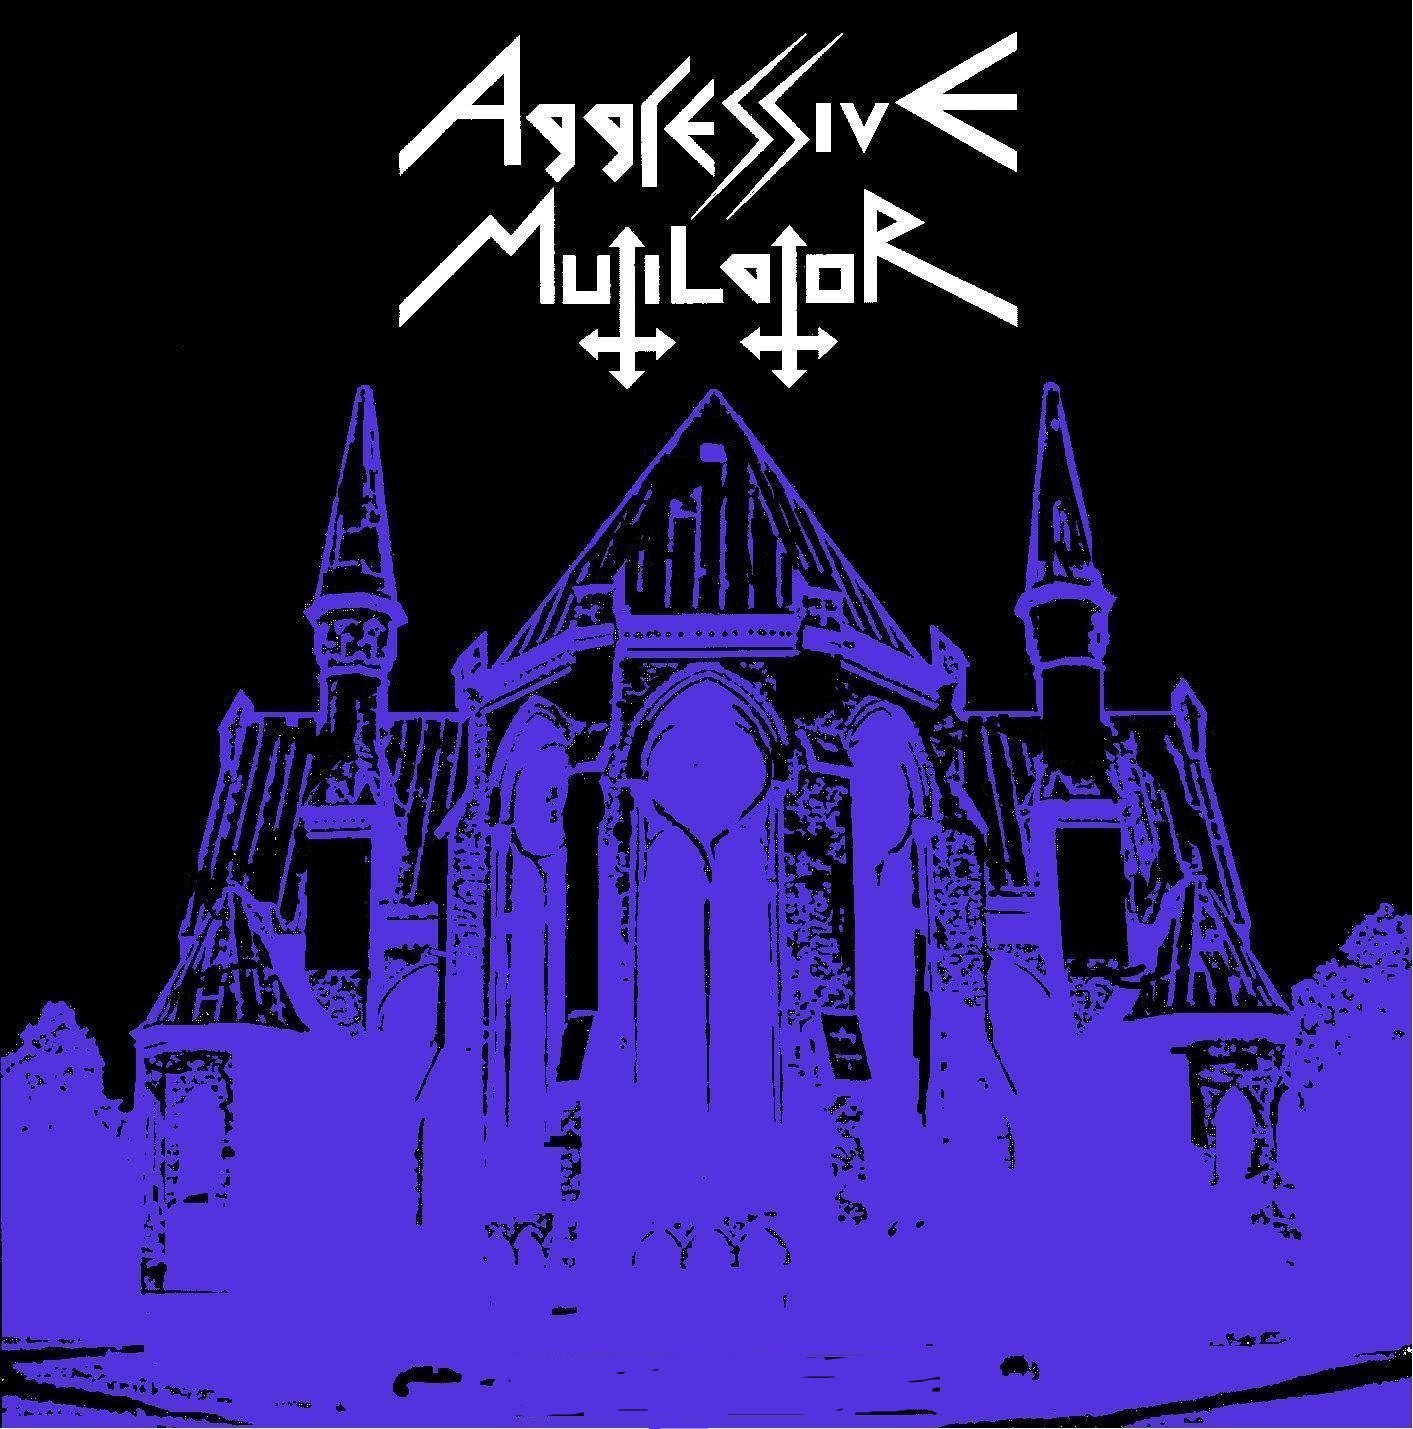 Interview with AGGRESSIVE MUTILATOR